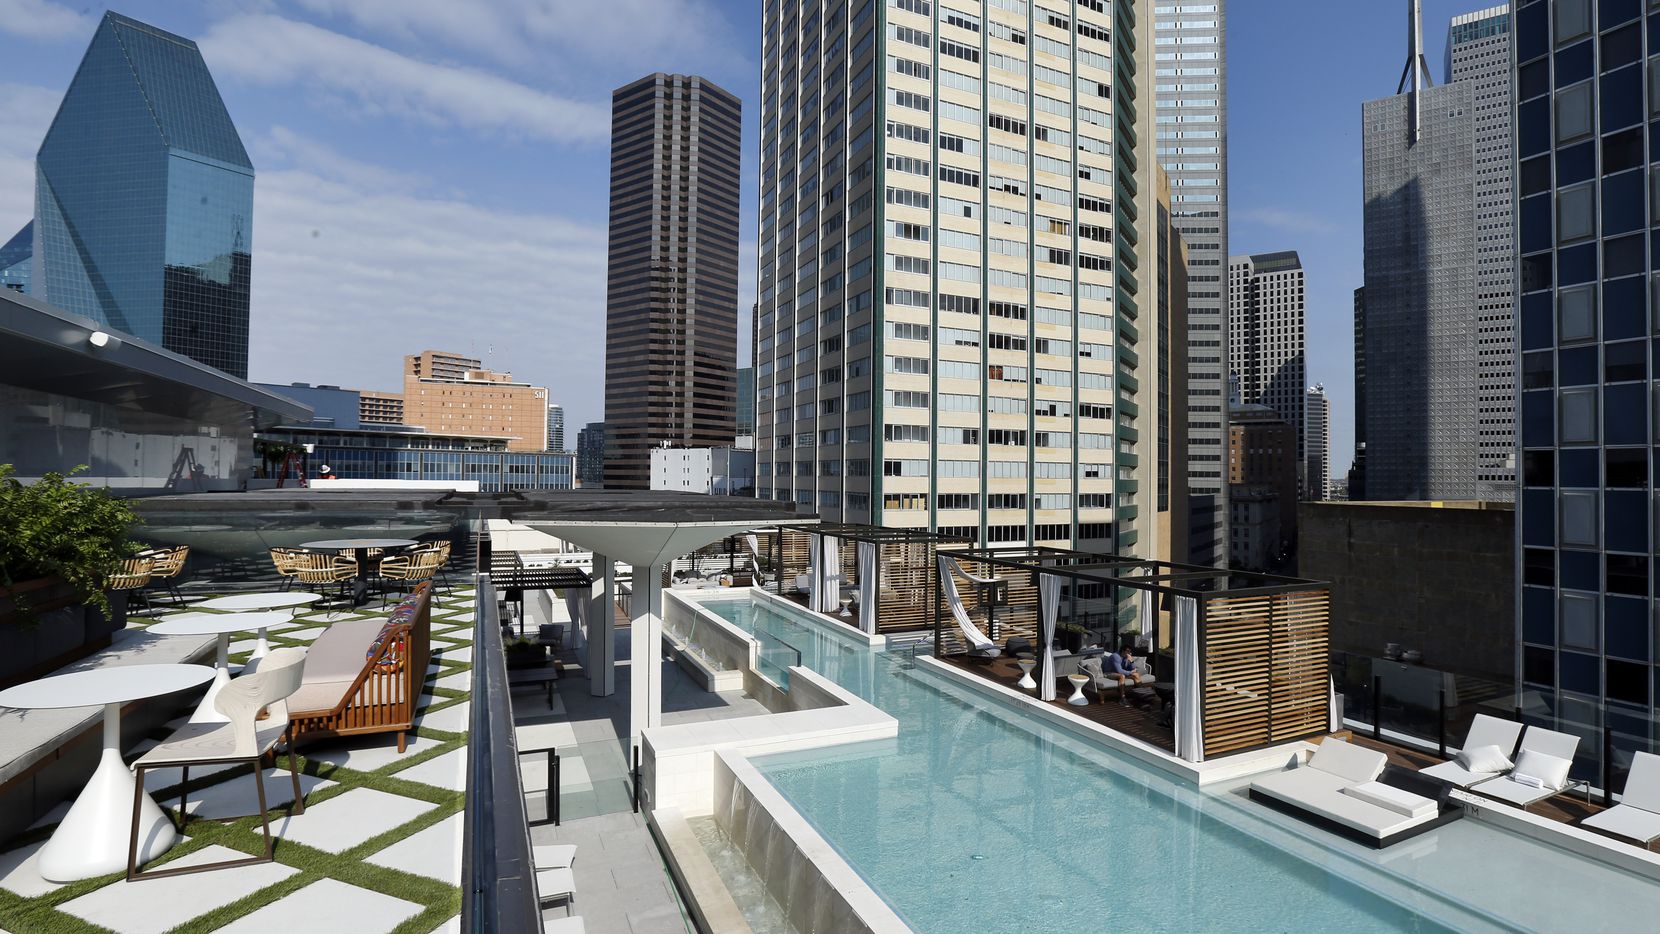 Fountain Place building (left) is seen from the the bar and pool deck areas of The National, a 52-story Elm Street building, which has been renovated into a mixed-use project with hotel rooms, apartments, retail and offices in the old First National Bank Tower in downtown Dallas. (Tom Fox/The Dallas Morning News)